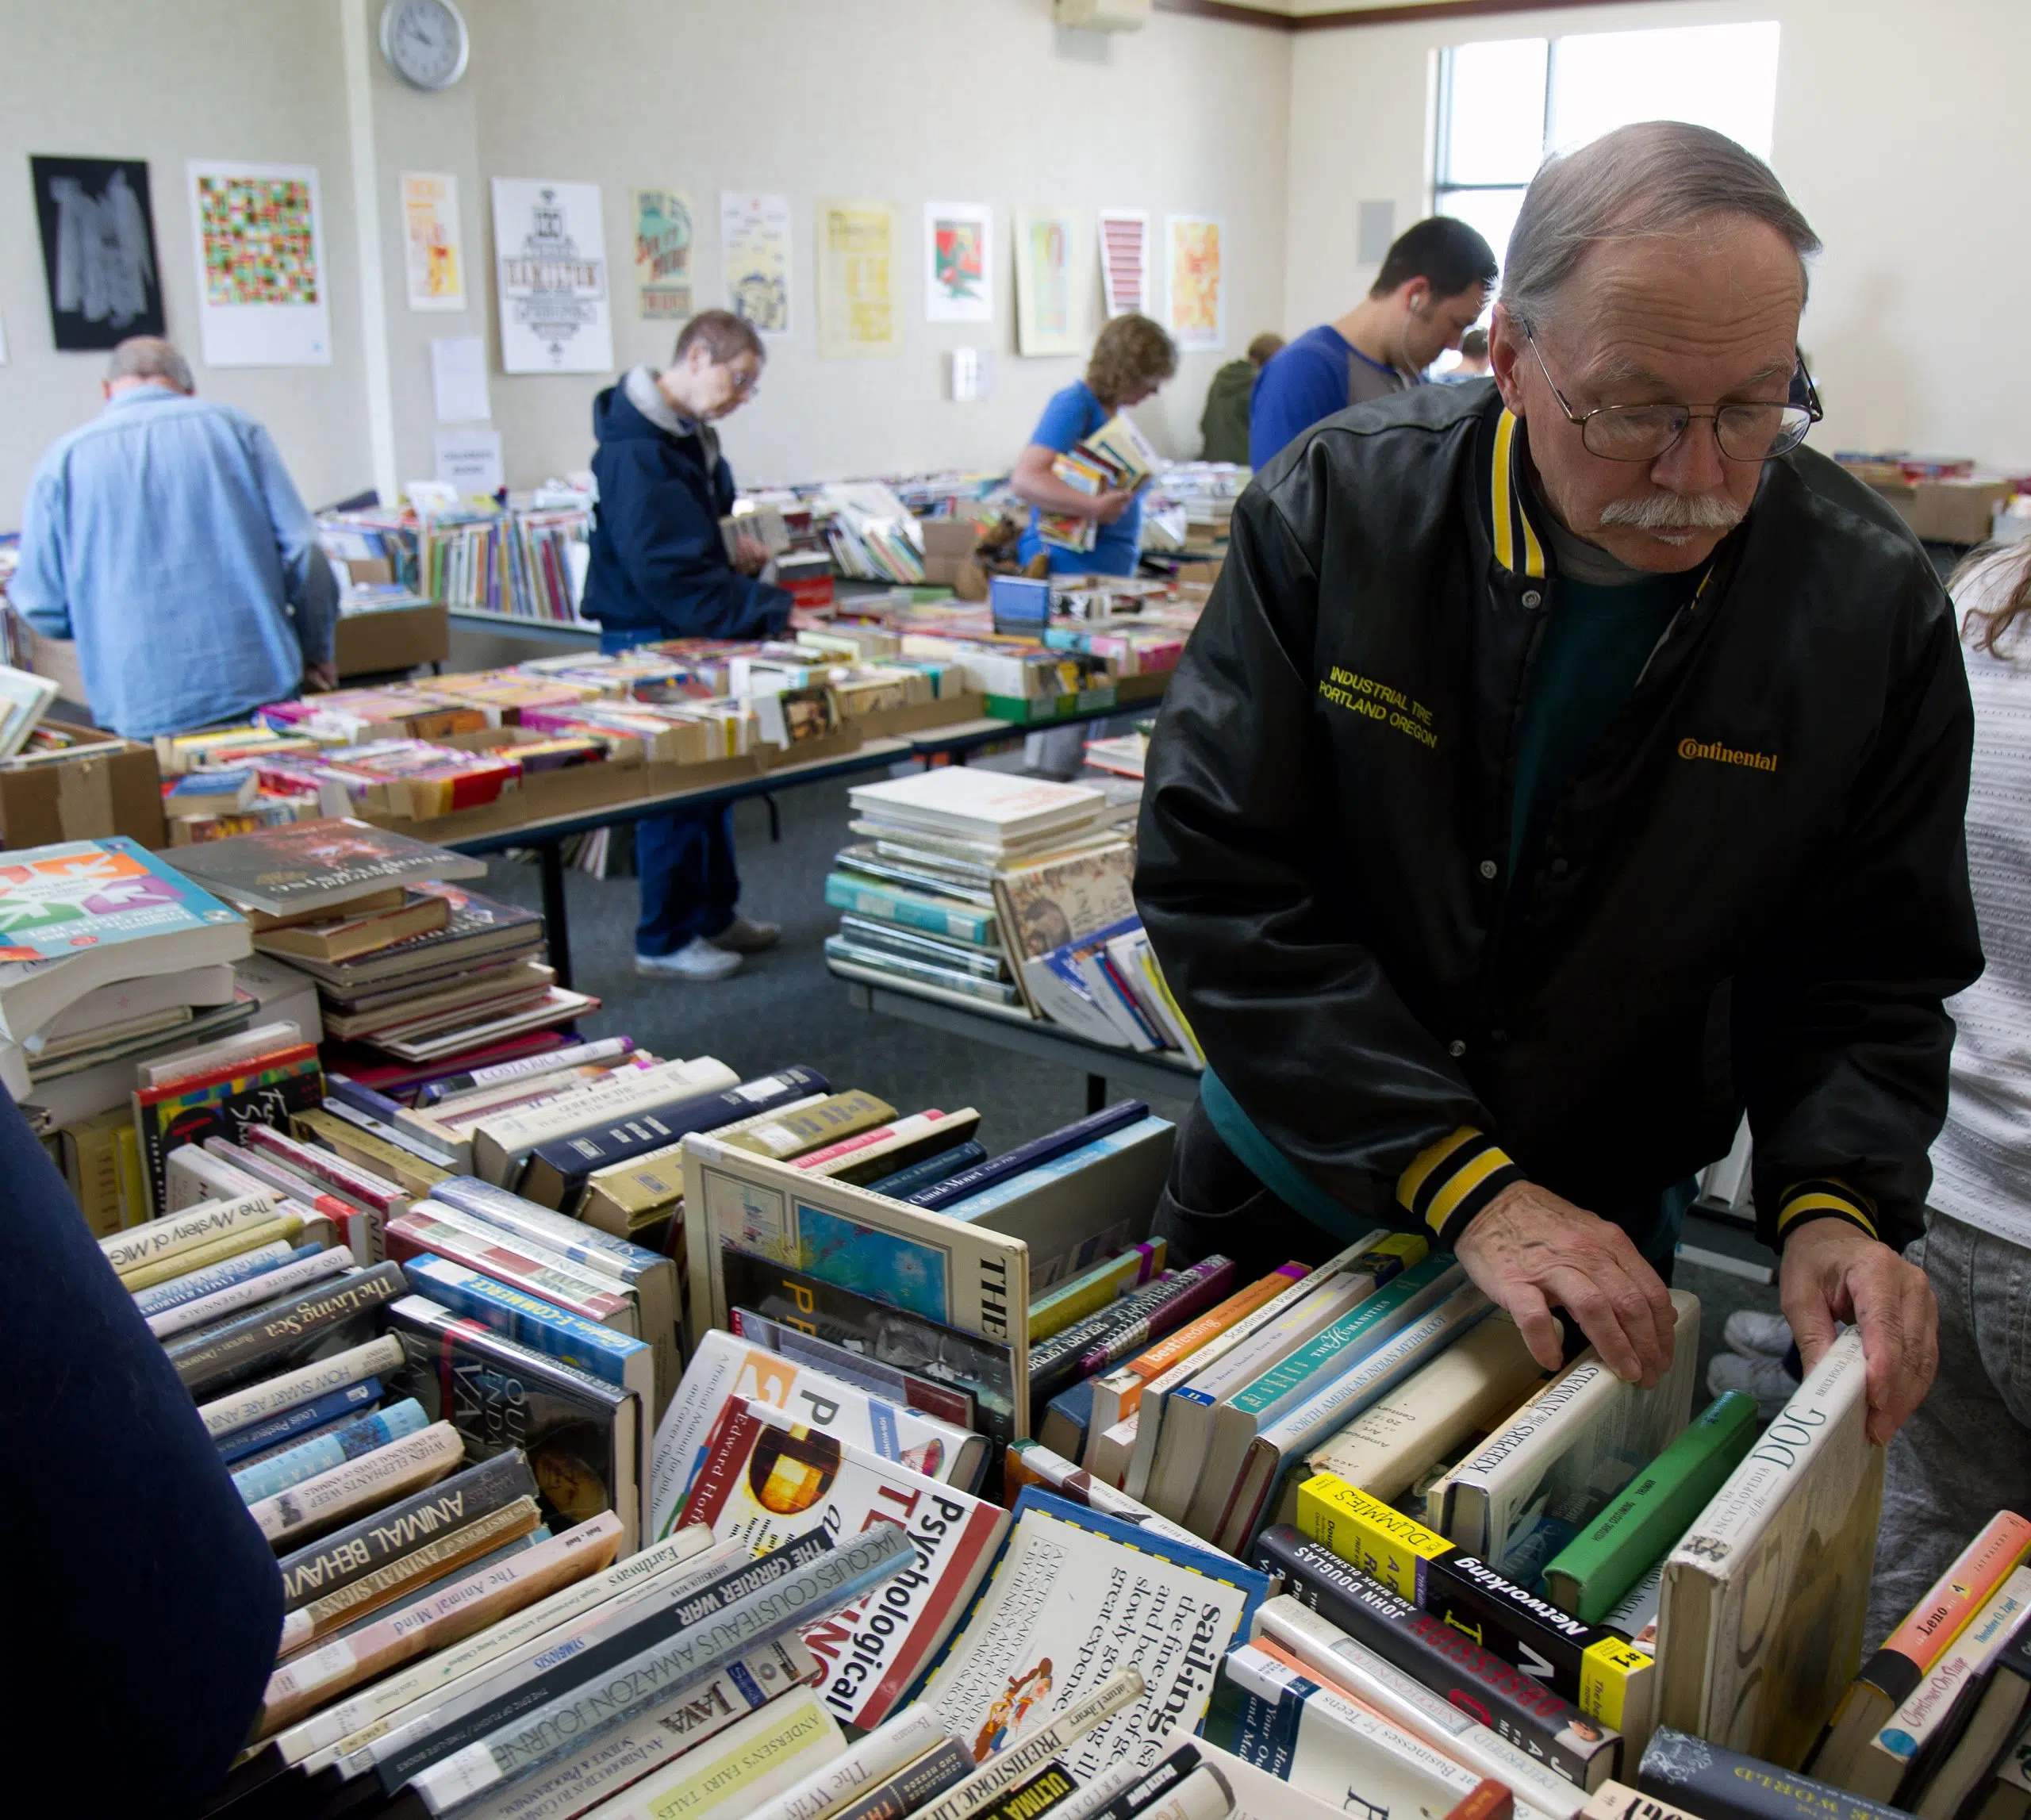 Lester Public Library to Host Book Sale This Month